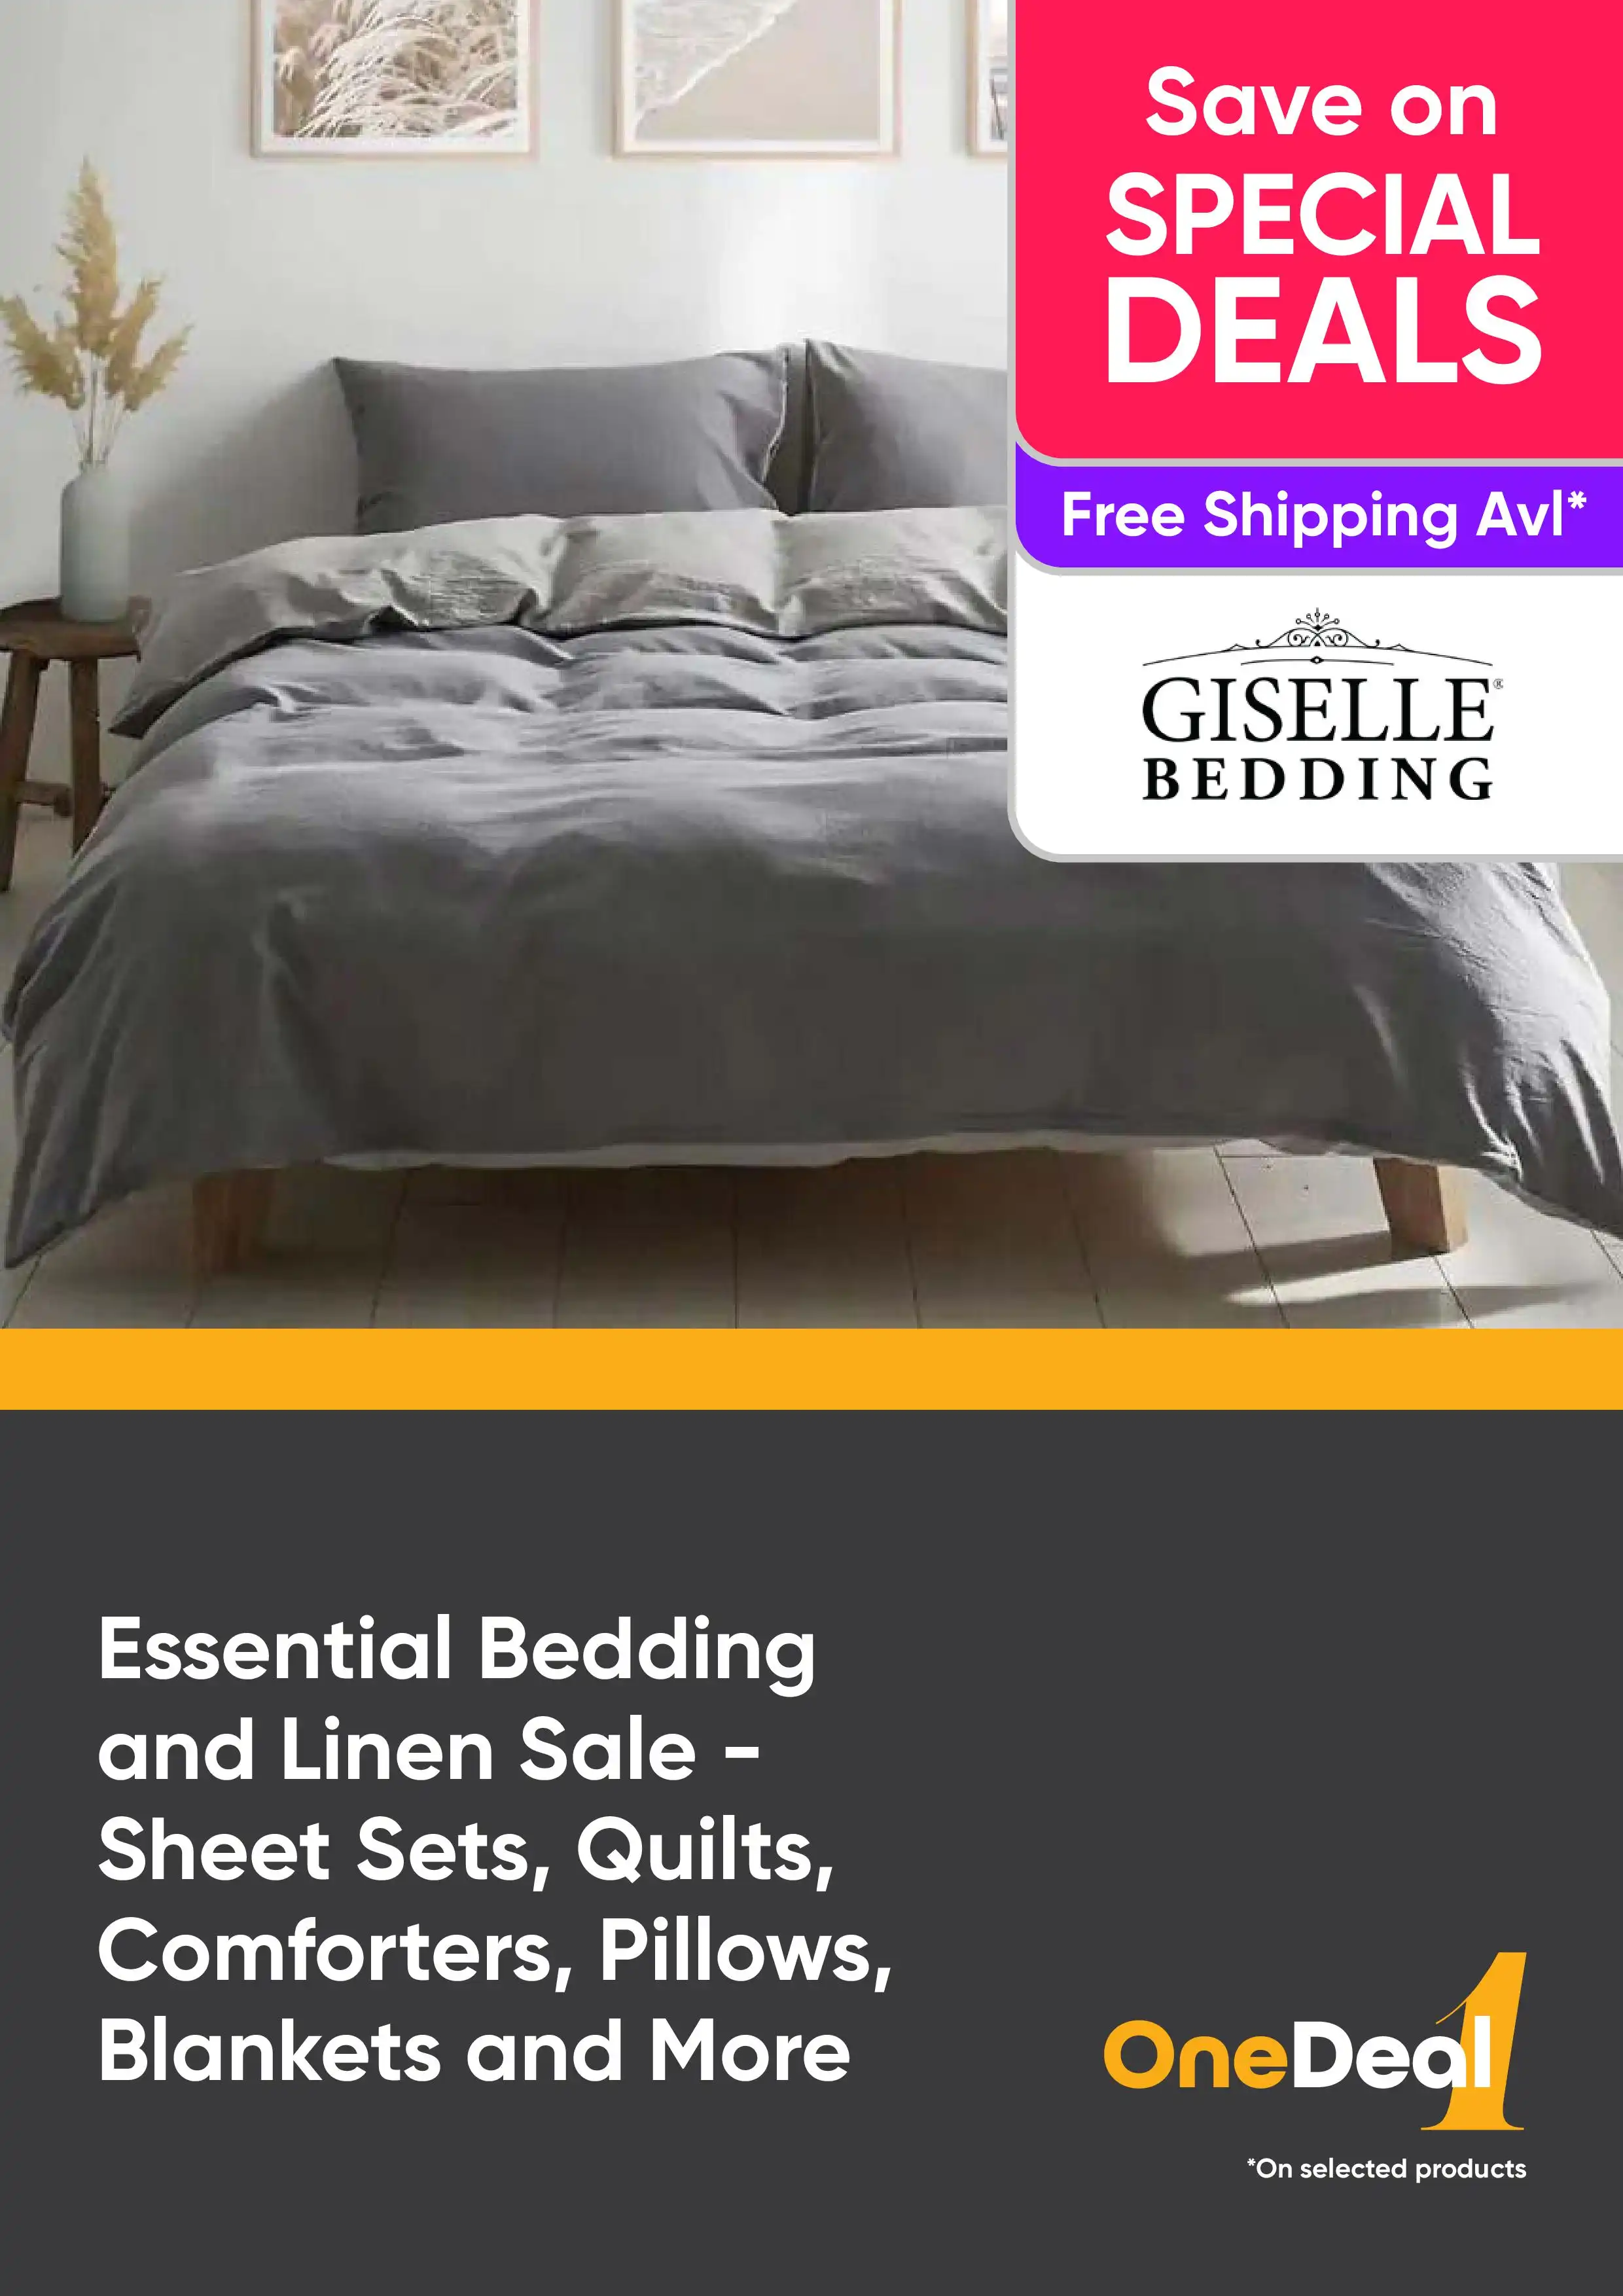 Essential Bedding and Linen Sale - Shop Sheet Sets, Quilts, Comforters, Pillows, Blankets and More